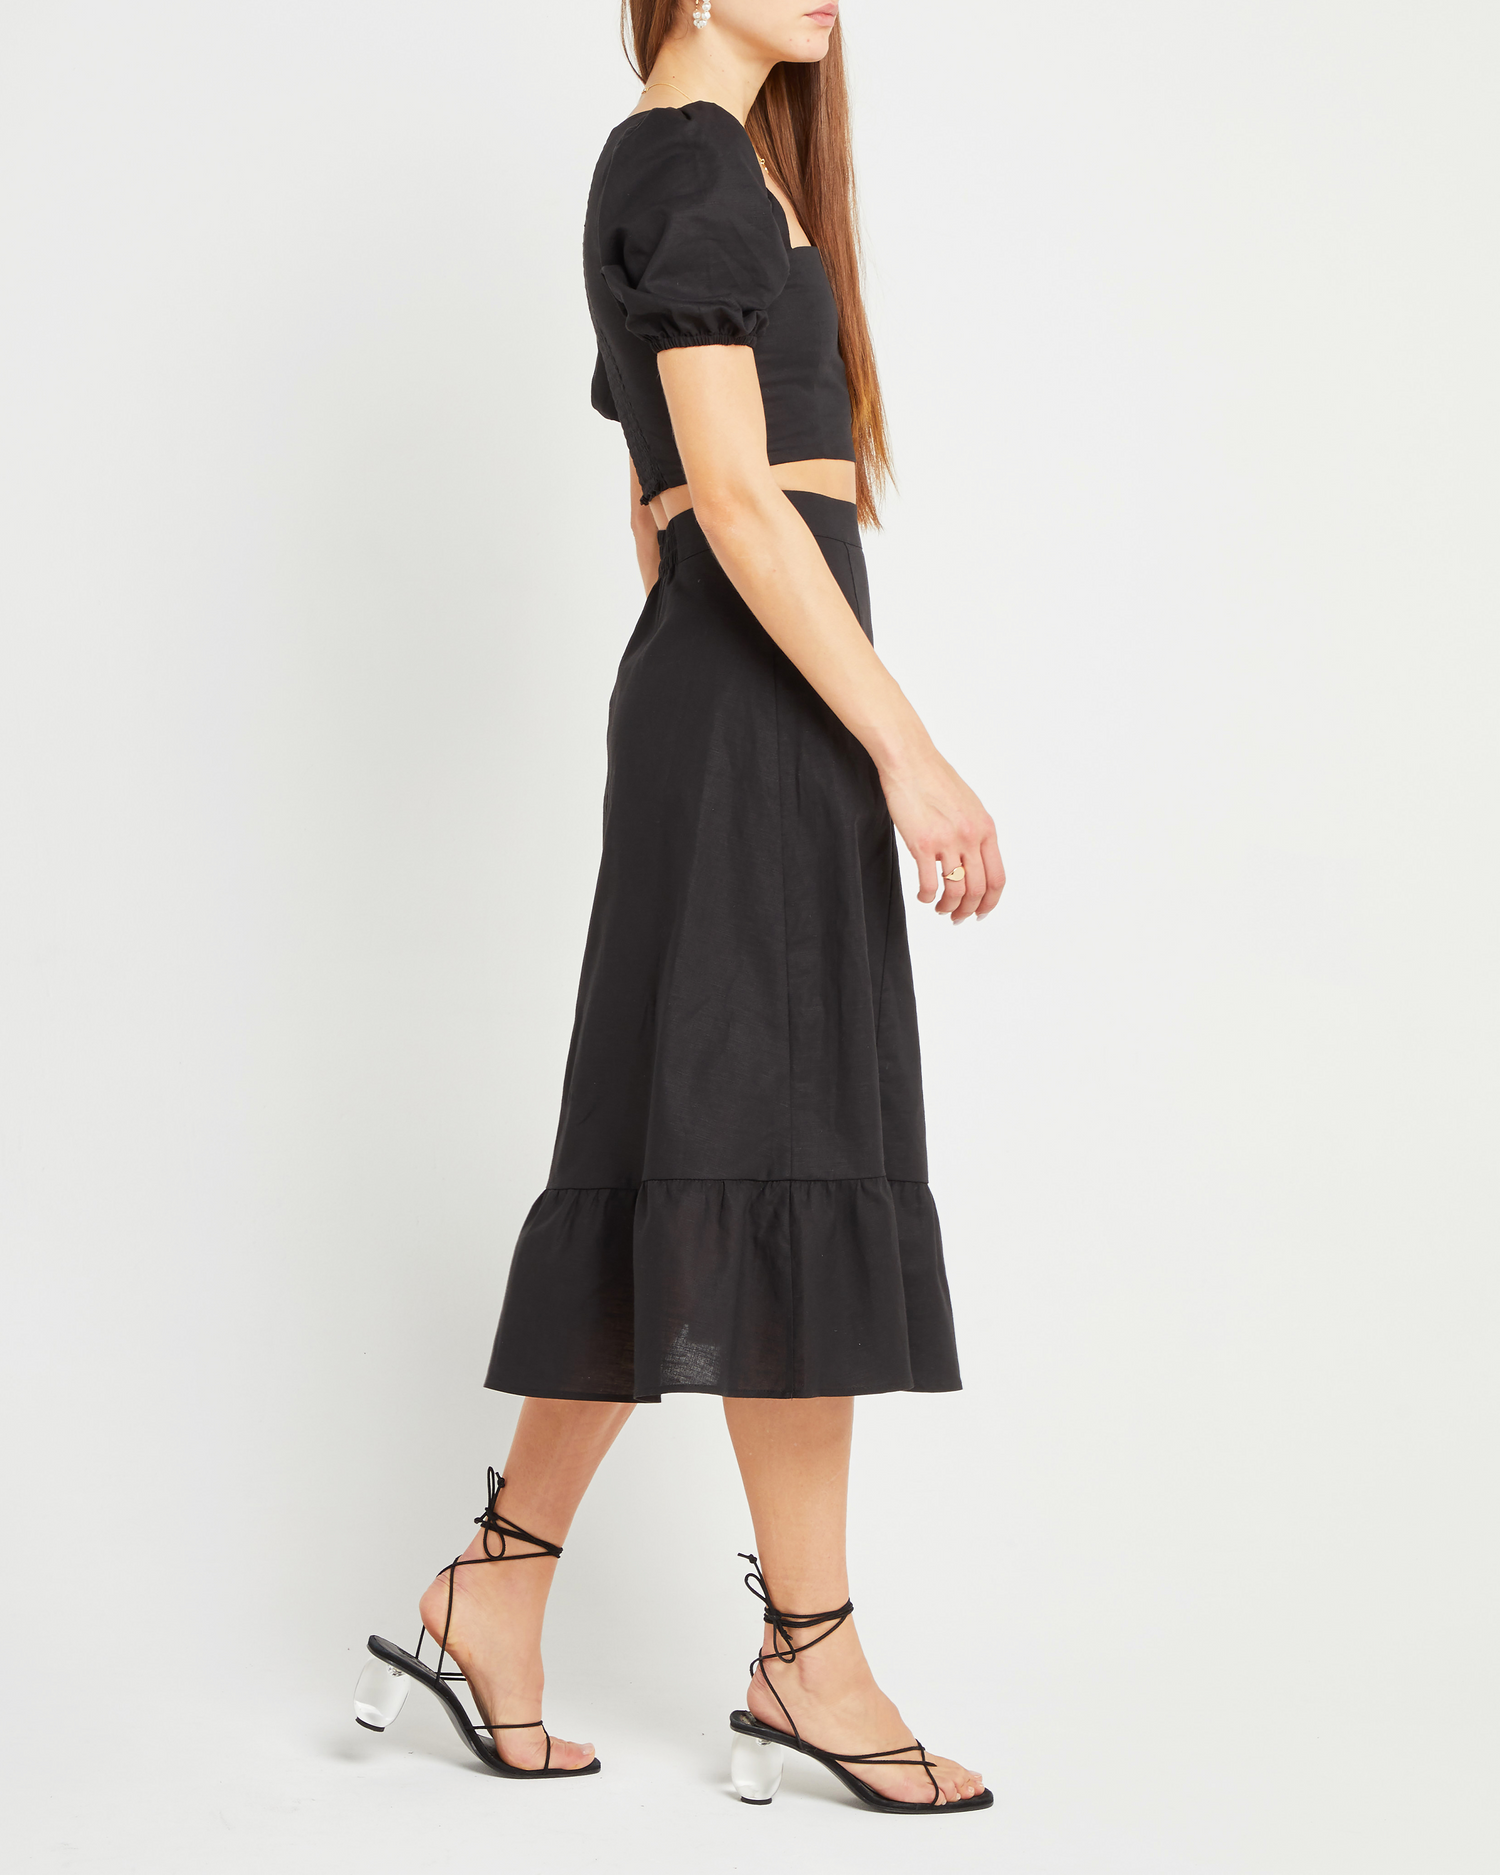 Fifth image of Sana Set, a black top and maxi skirt, puff sleeve, seperates, square neckline